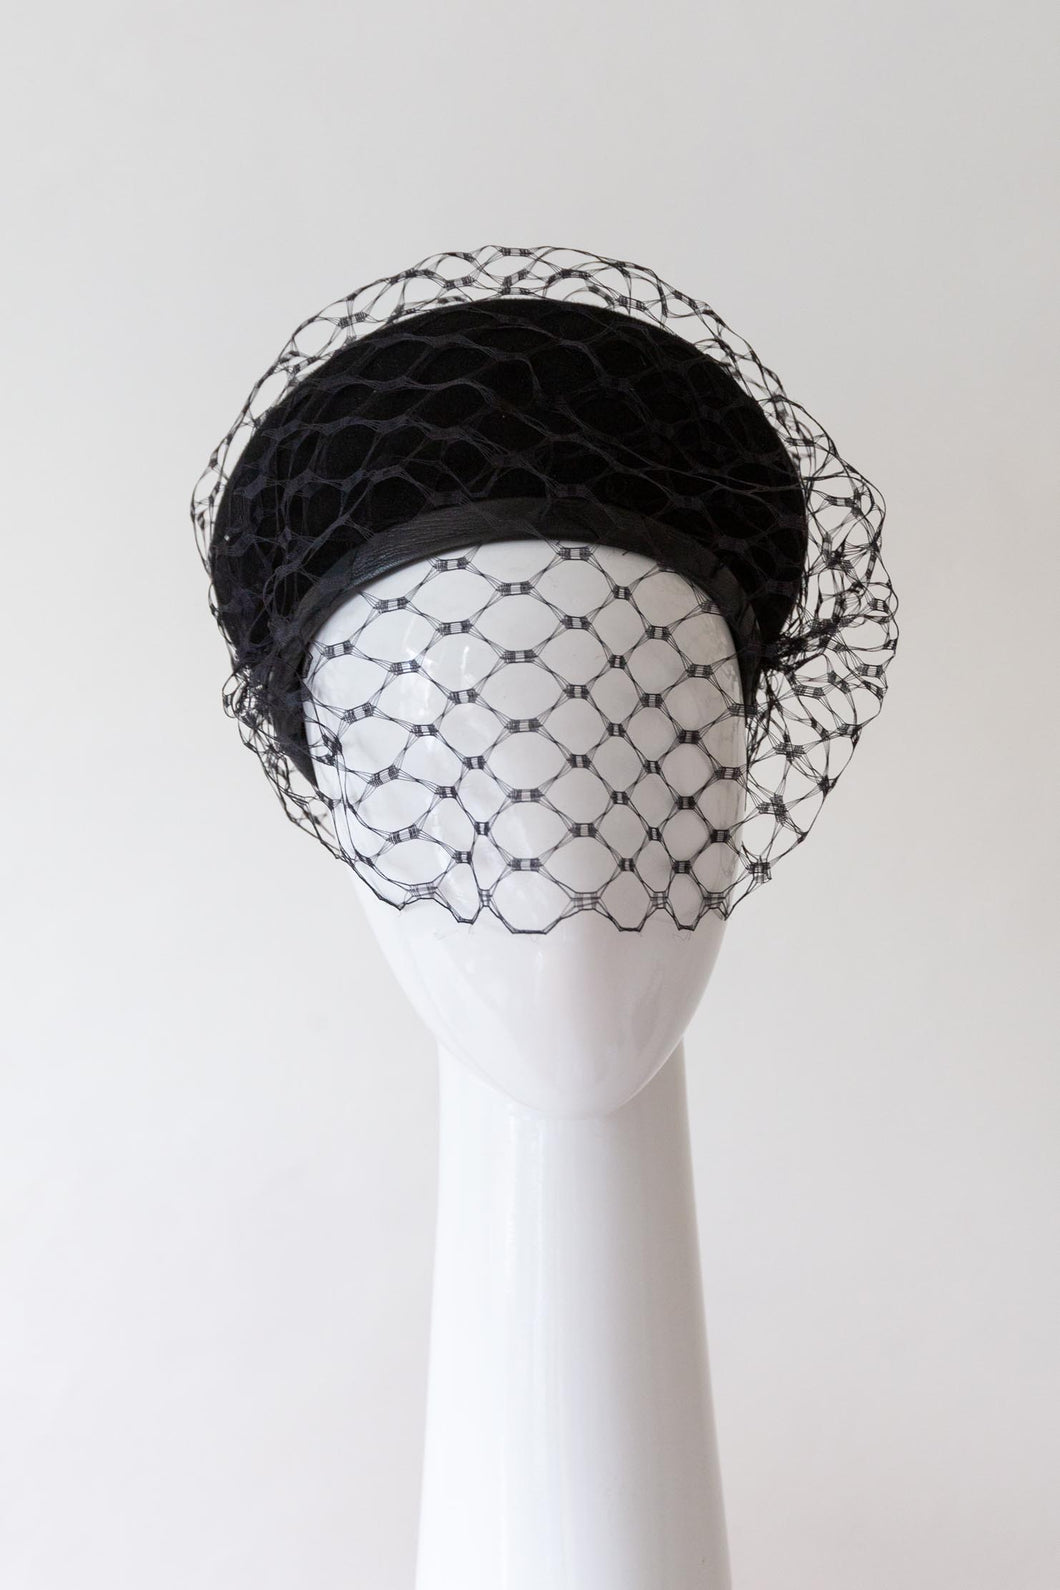 Black Felt Beret with Veiling by Felicity Northeast Millinery